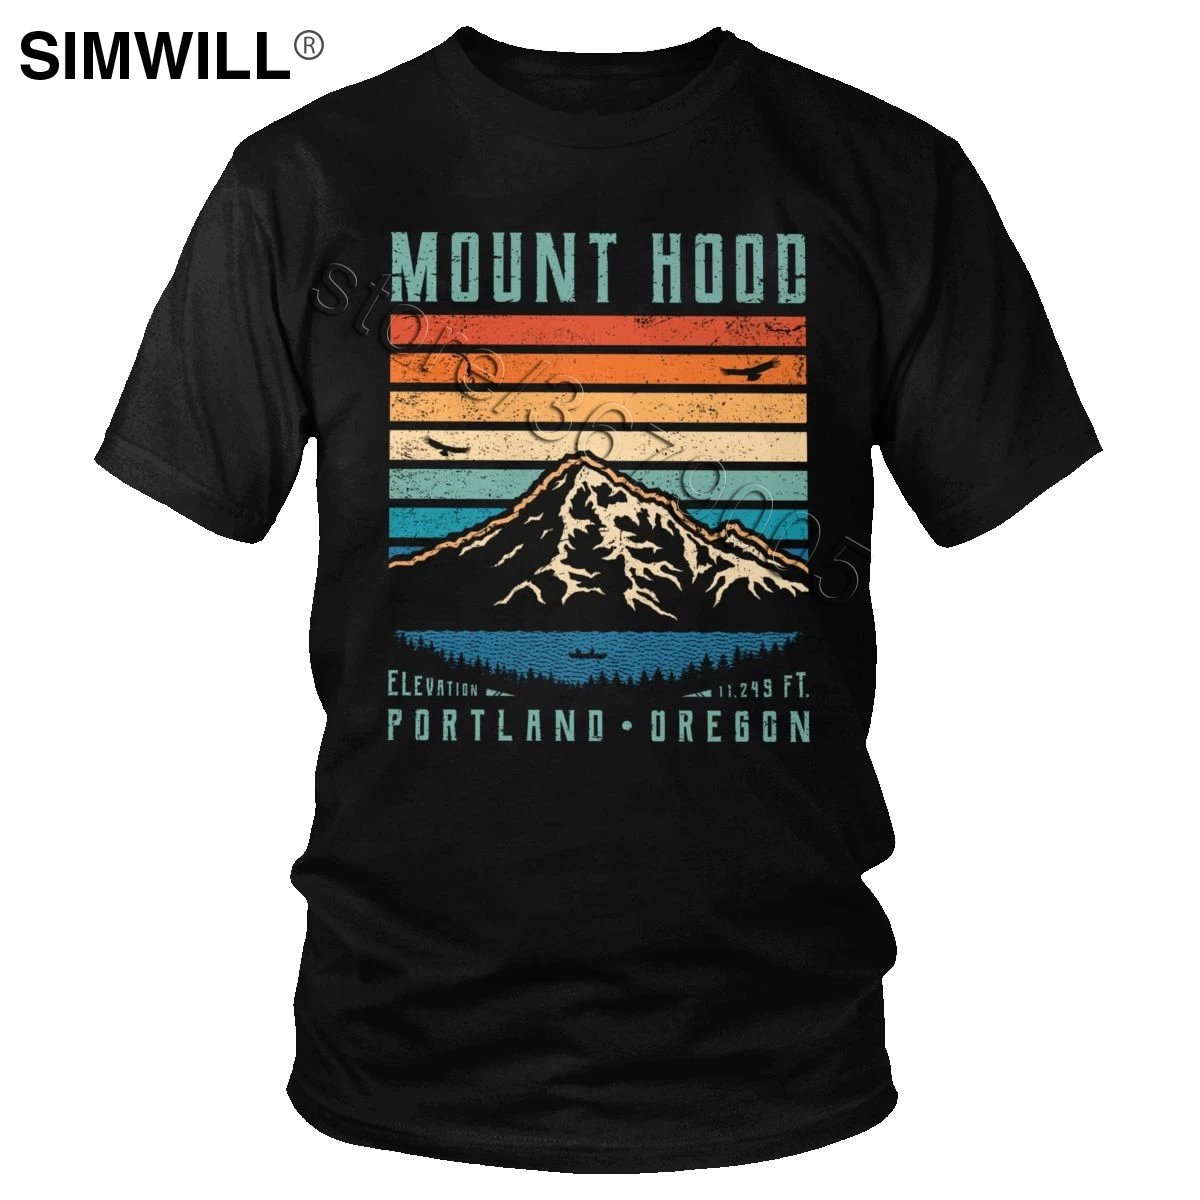 

Male Vintage Mountain Oregon's Mount Hood T Shirt 80S National Forest Tee Short Sleeves Cotton Graphic T-Shirt Streetwear Tshirt